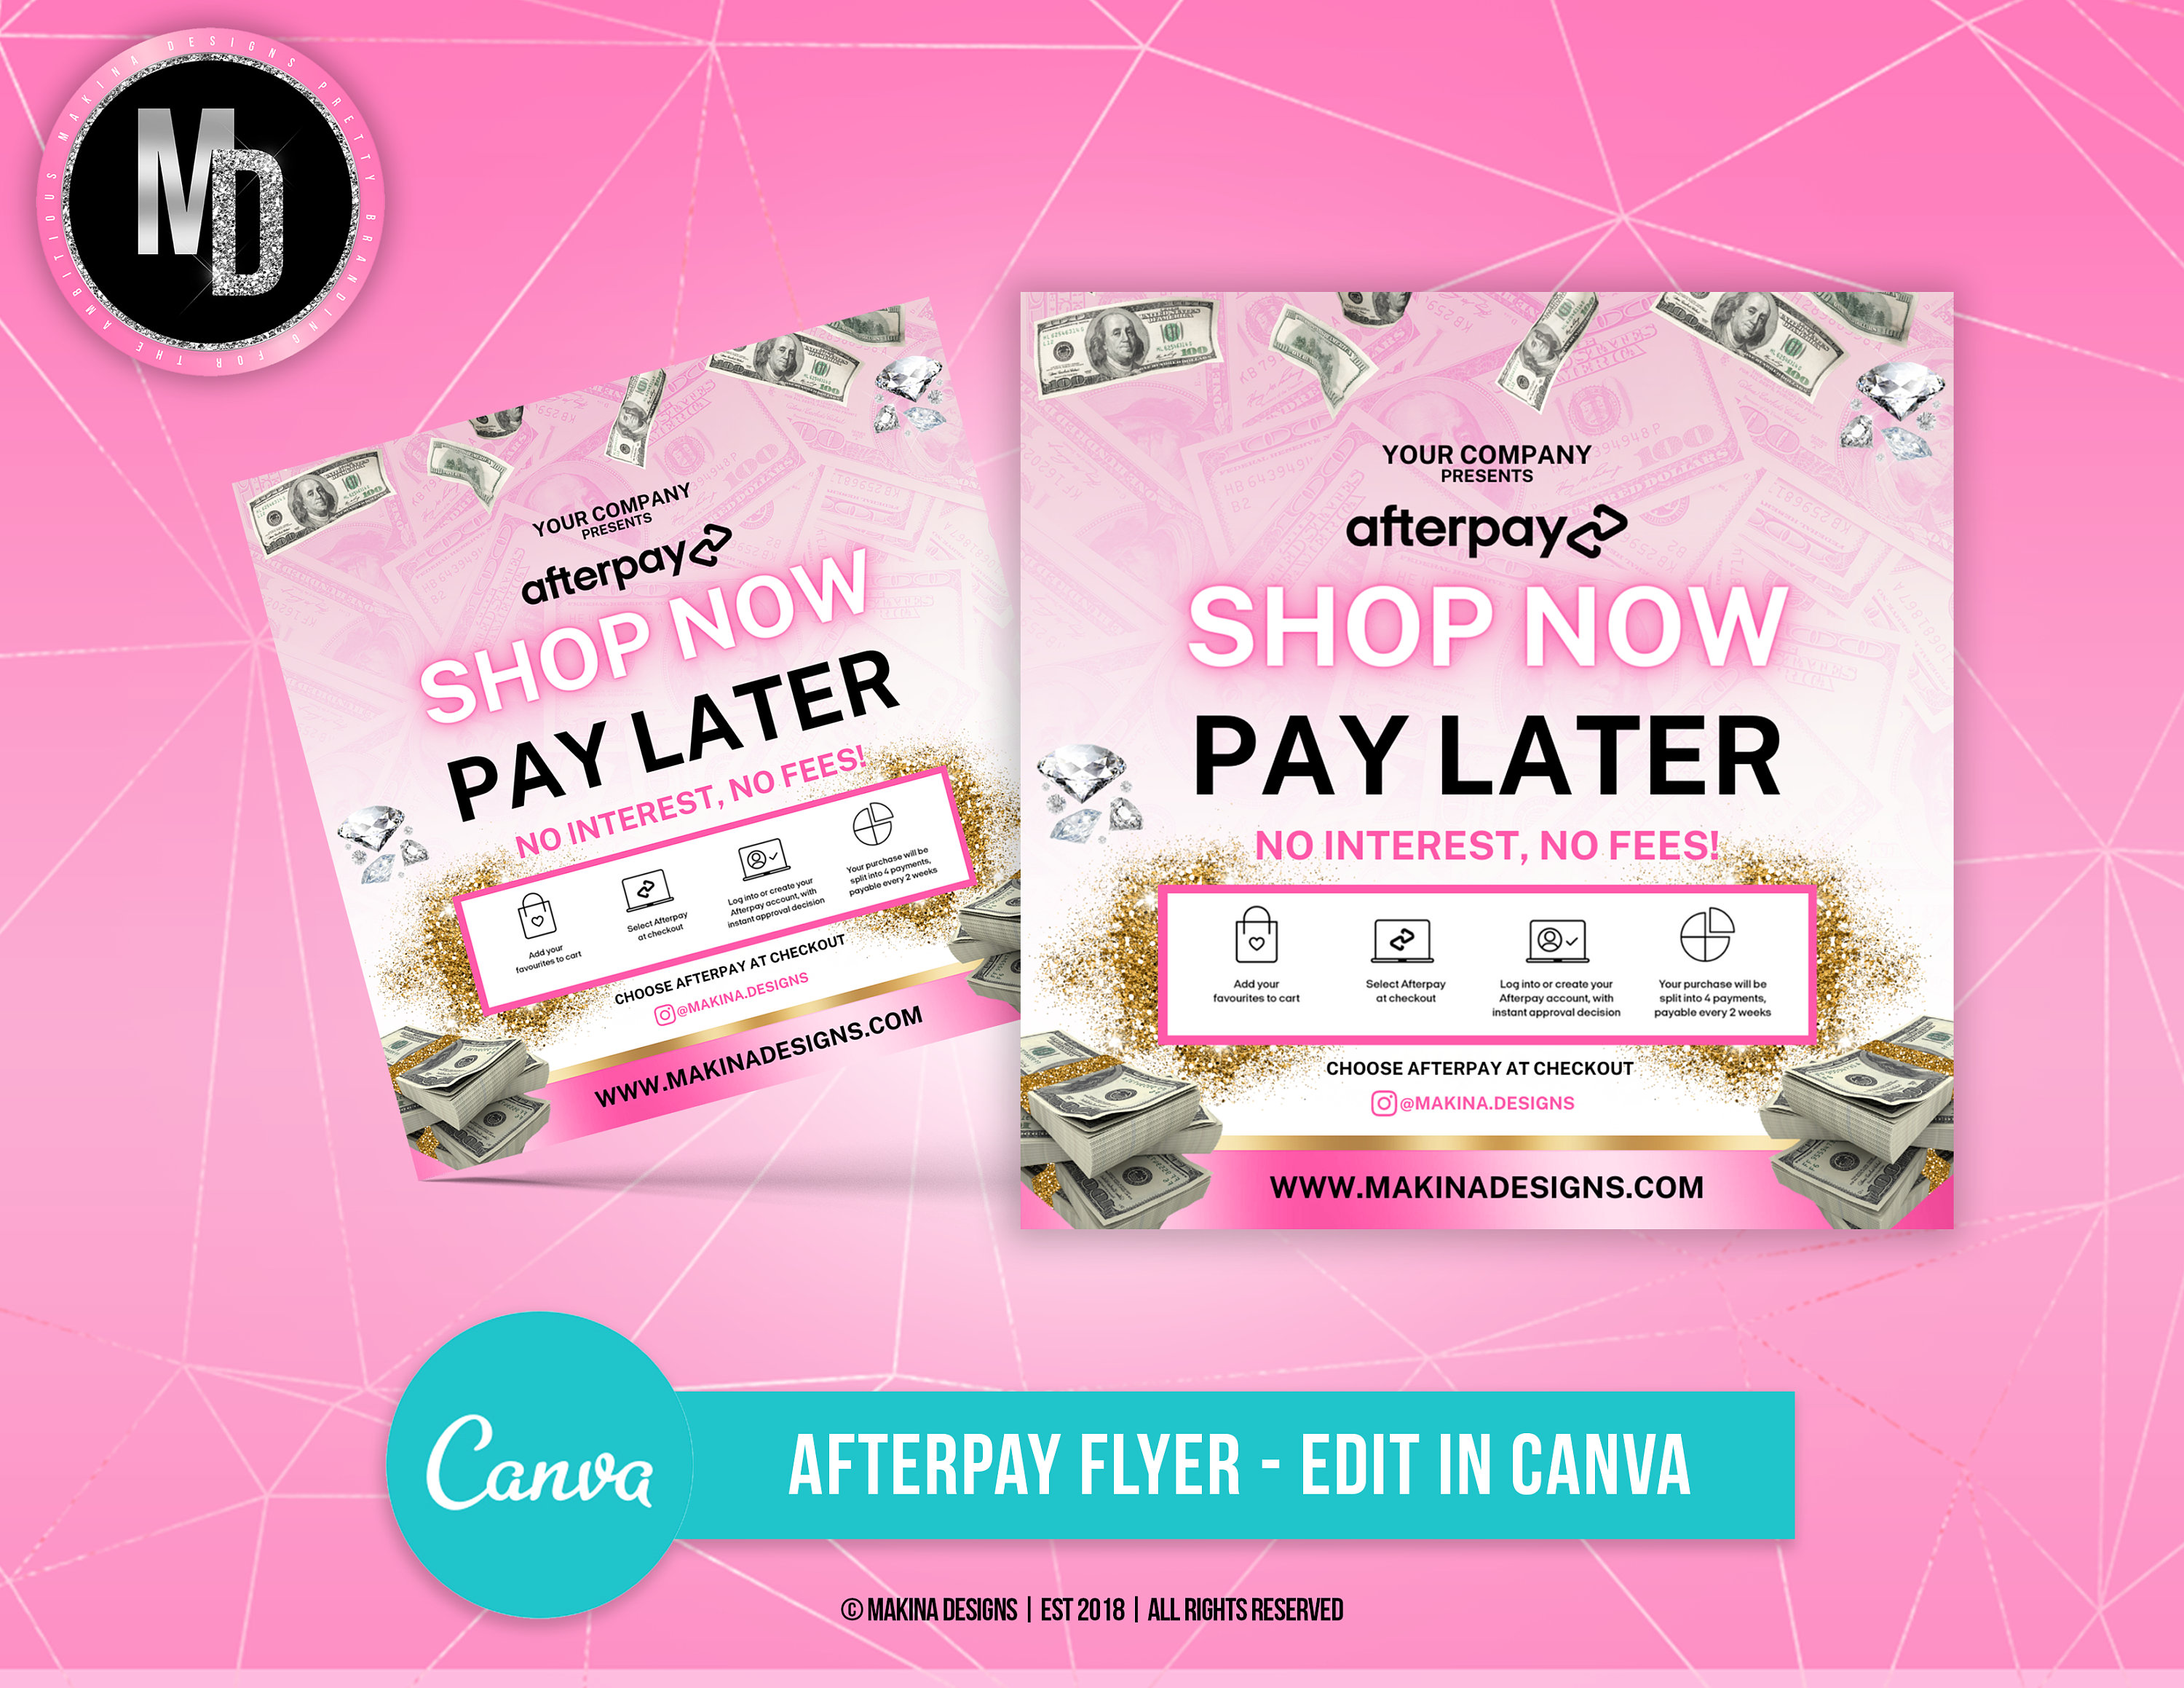 AFTERPAY CANVA FLYER canva template flyer social media flyer canva template hair canva flyer editable canva flyer boutique flyer payment